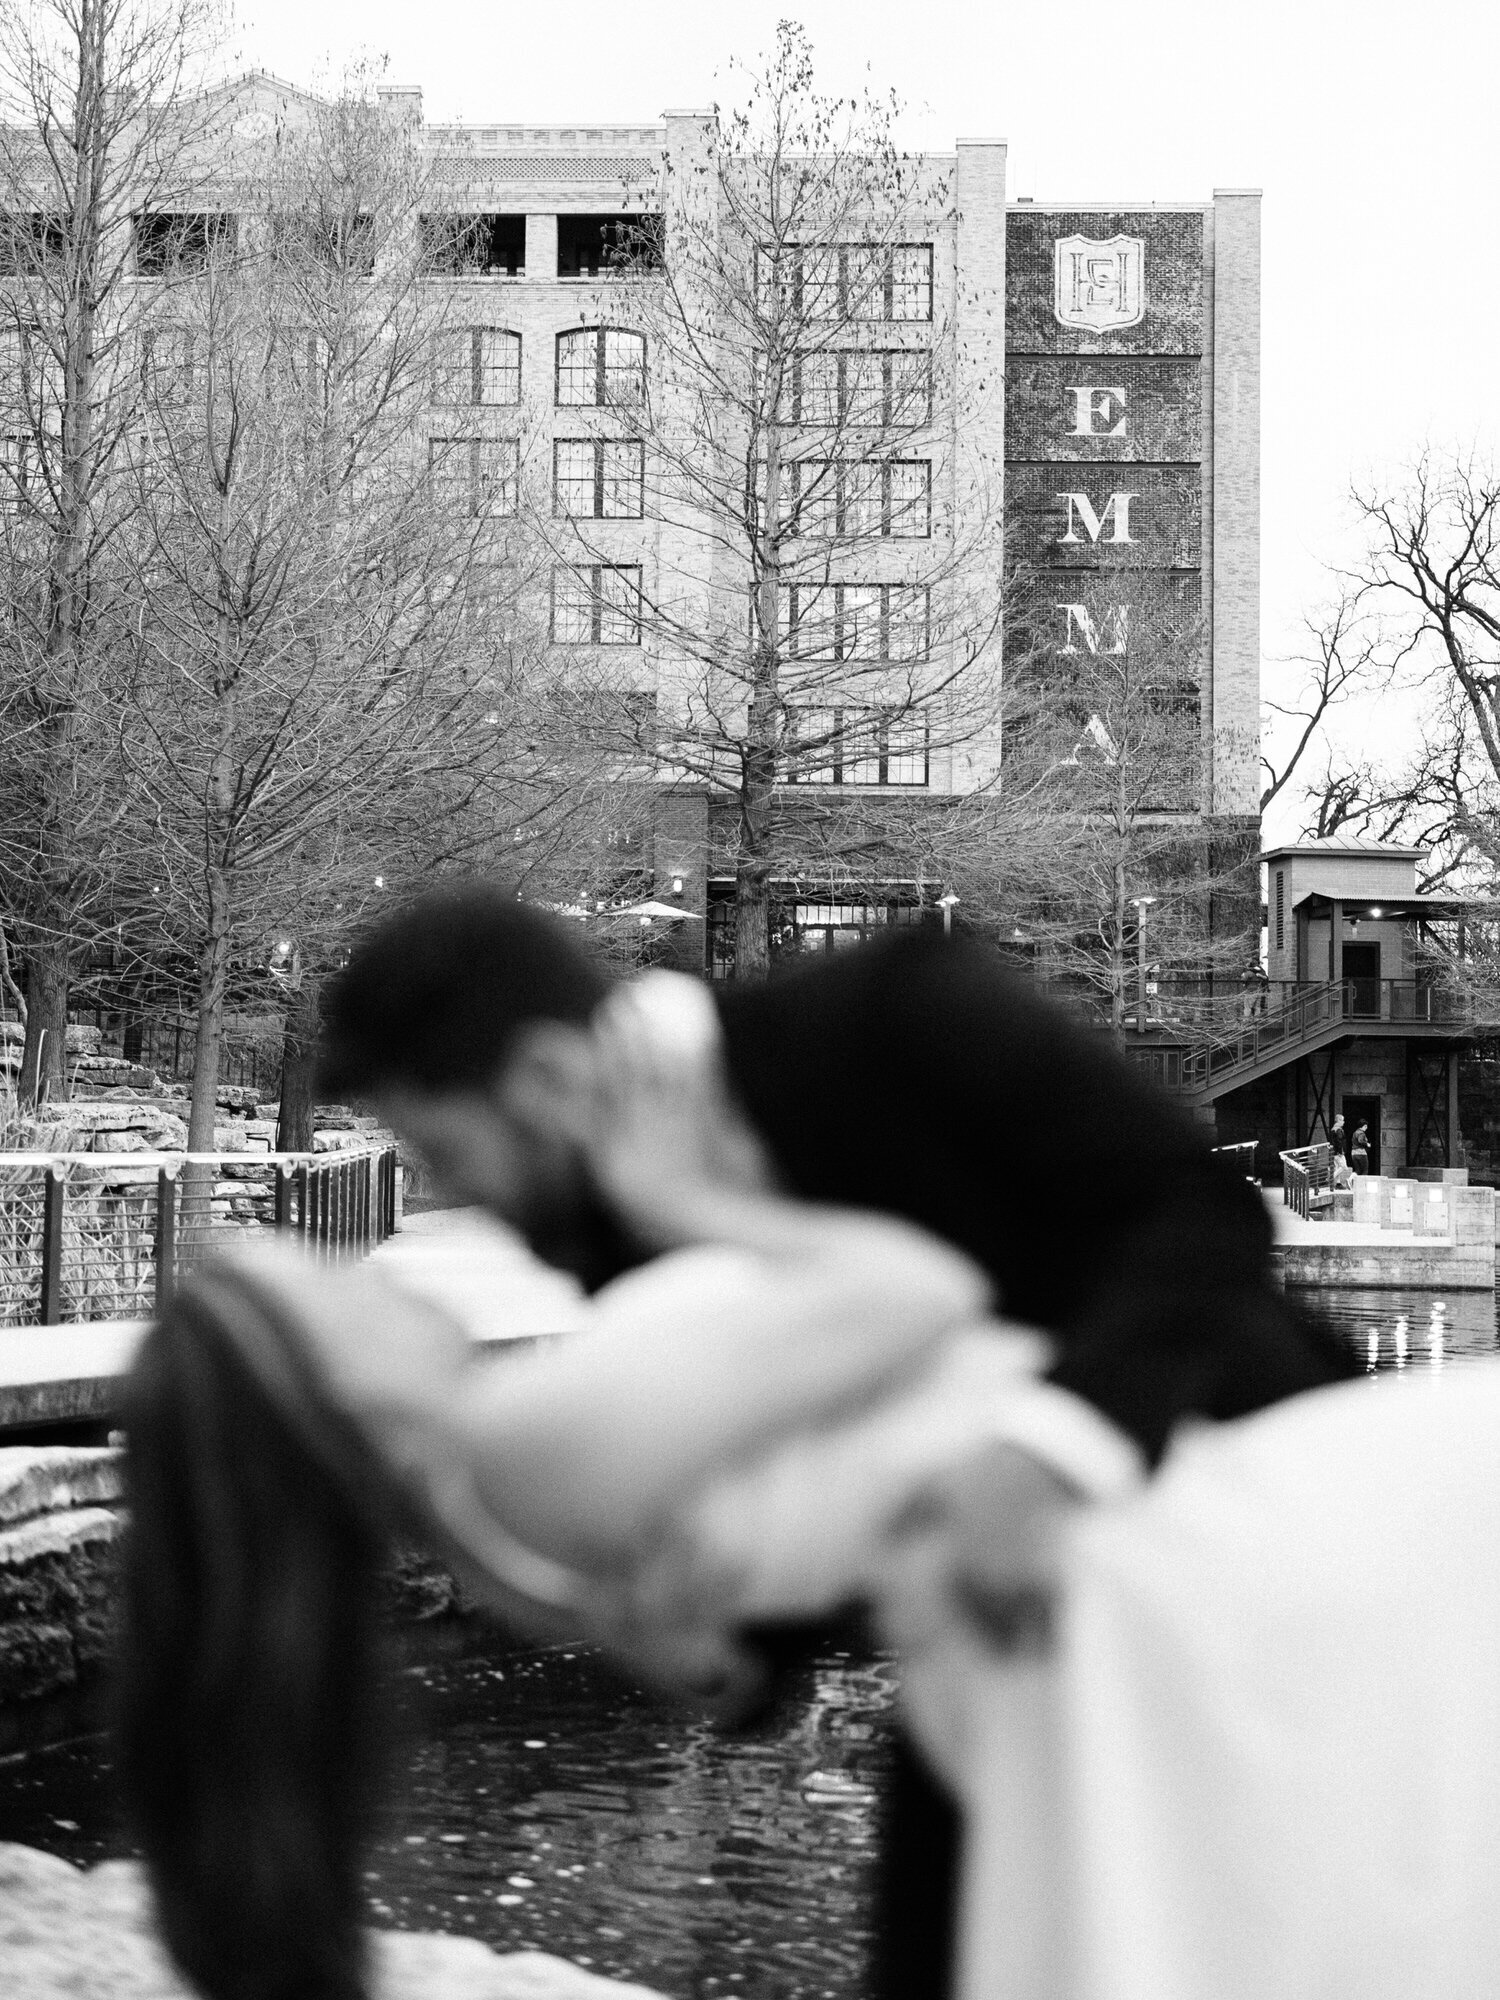 This image, taken at the Pearl in San Antonio, TX, features Hotel Emma prominently in the background, with a couple kissing in the foreground. The couple is out of focus and the man is dipping the woman.